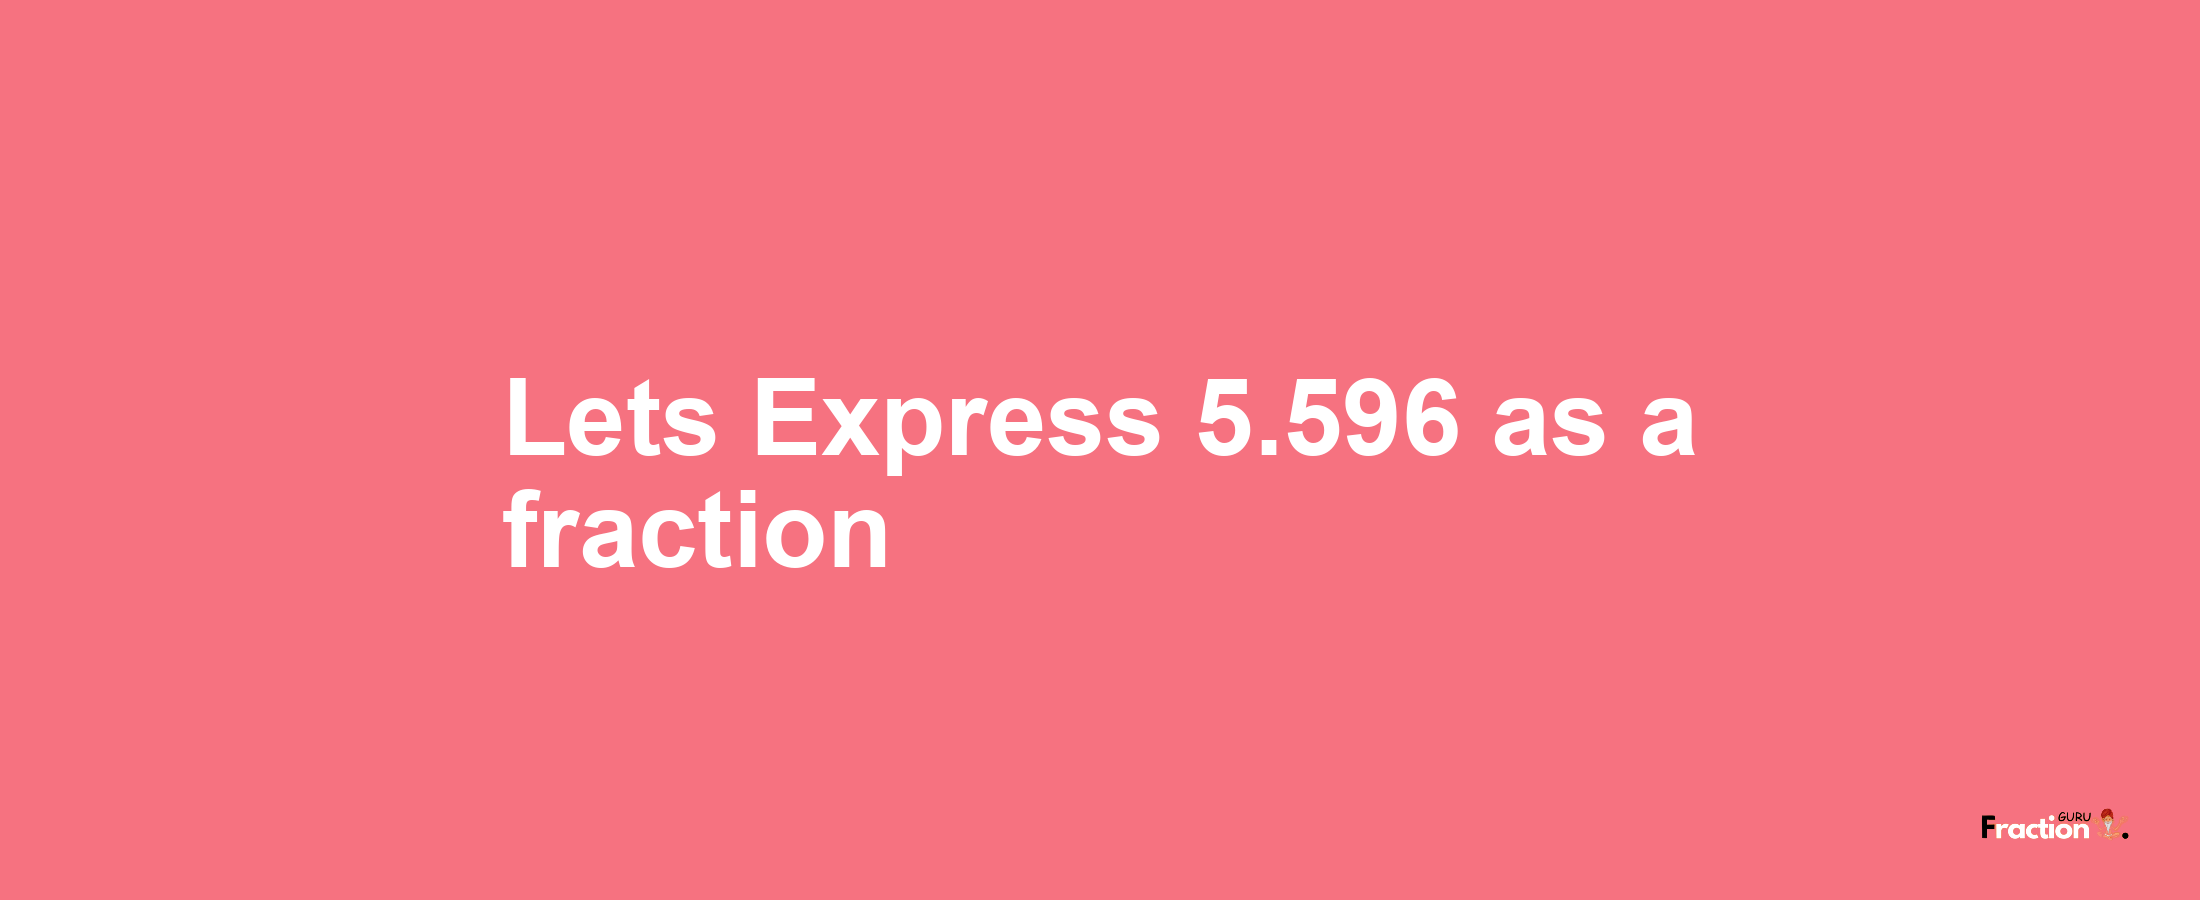 Lets Express 5.596 as afraction